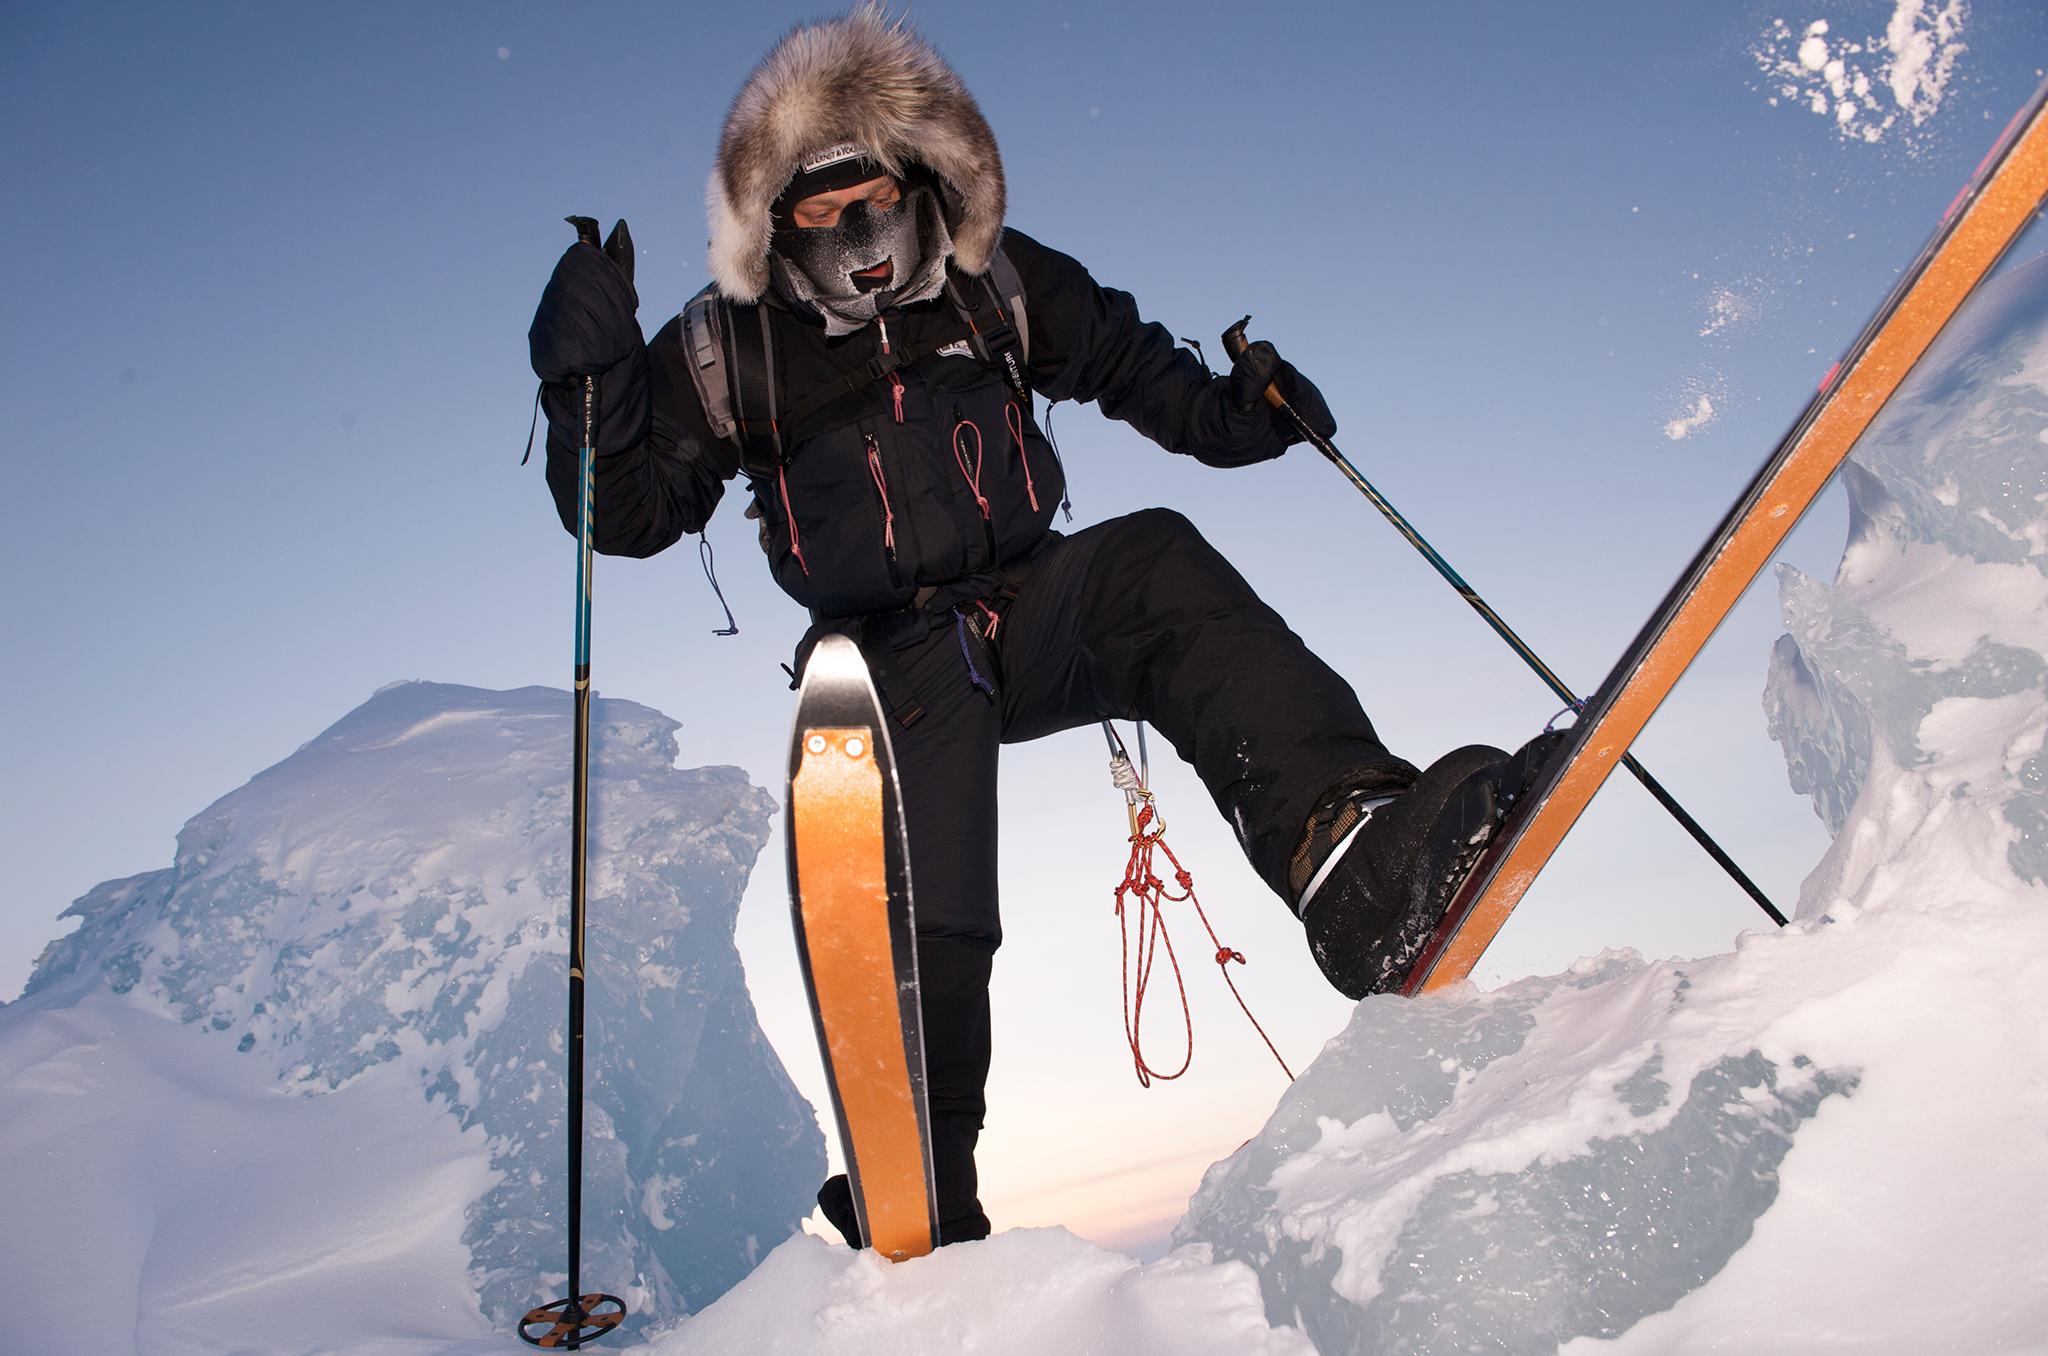 Ben Saunders achieved the first solo skiing expedition to the North Pole in 2004